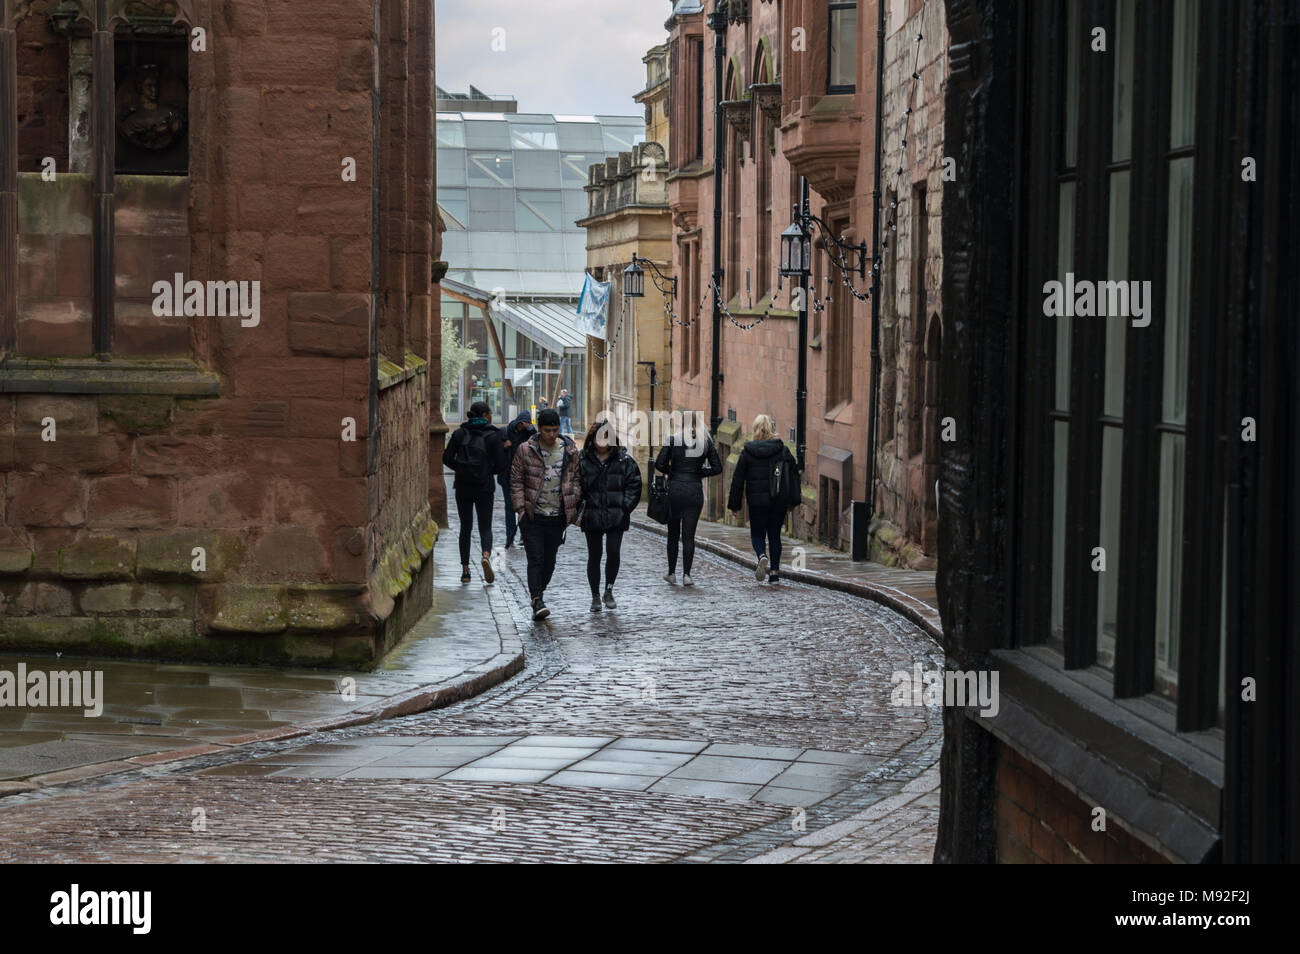 Members of the public walking  down the cobbled road of Bayley Lane around the old area of Coventry City Centre Stock Photo